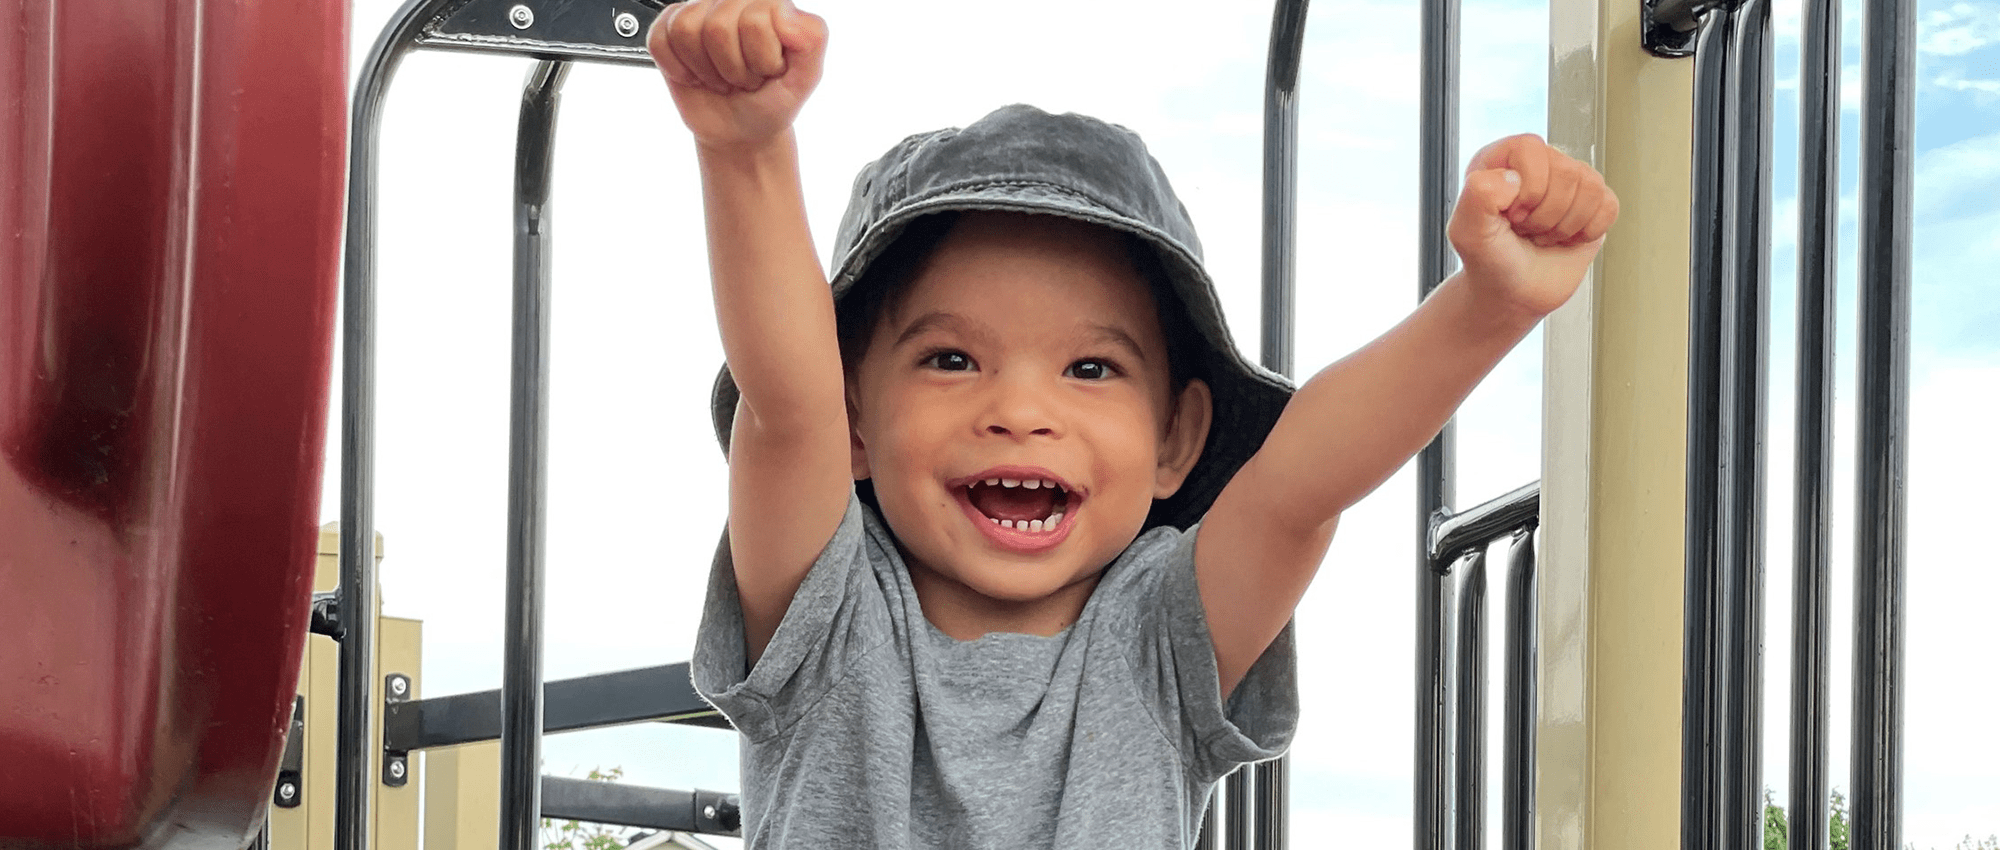 Boy smiling with outstretched arms on playground slide. 